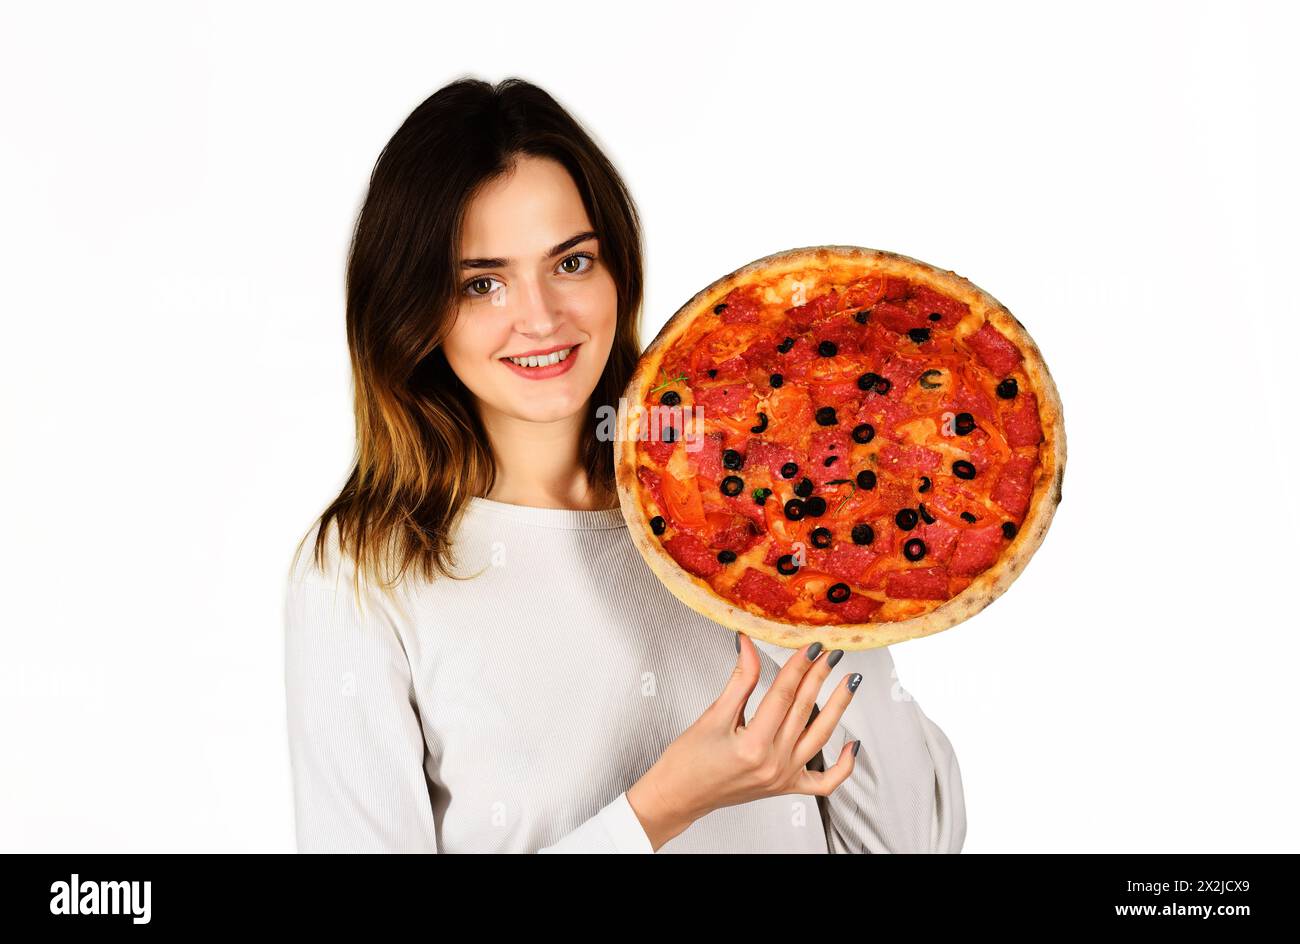 Pizza. Smiling woman with delicious pizza in hands. Lunch or dinner ...